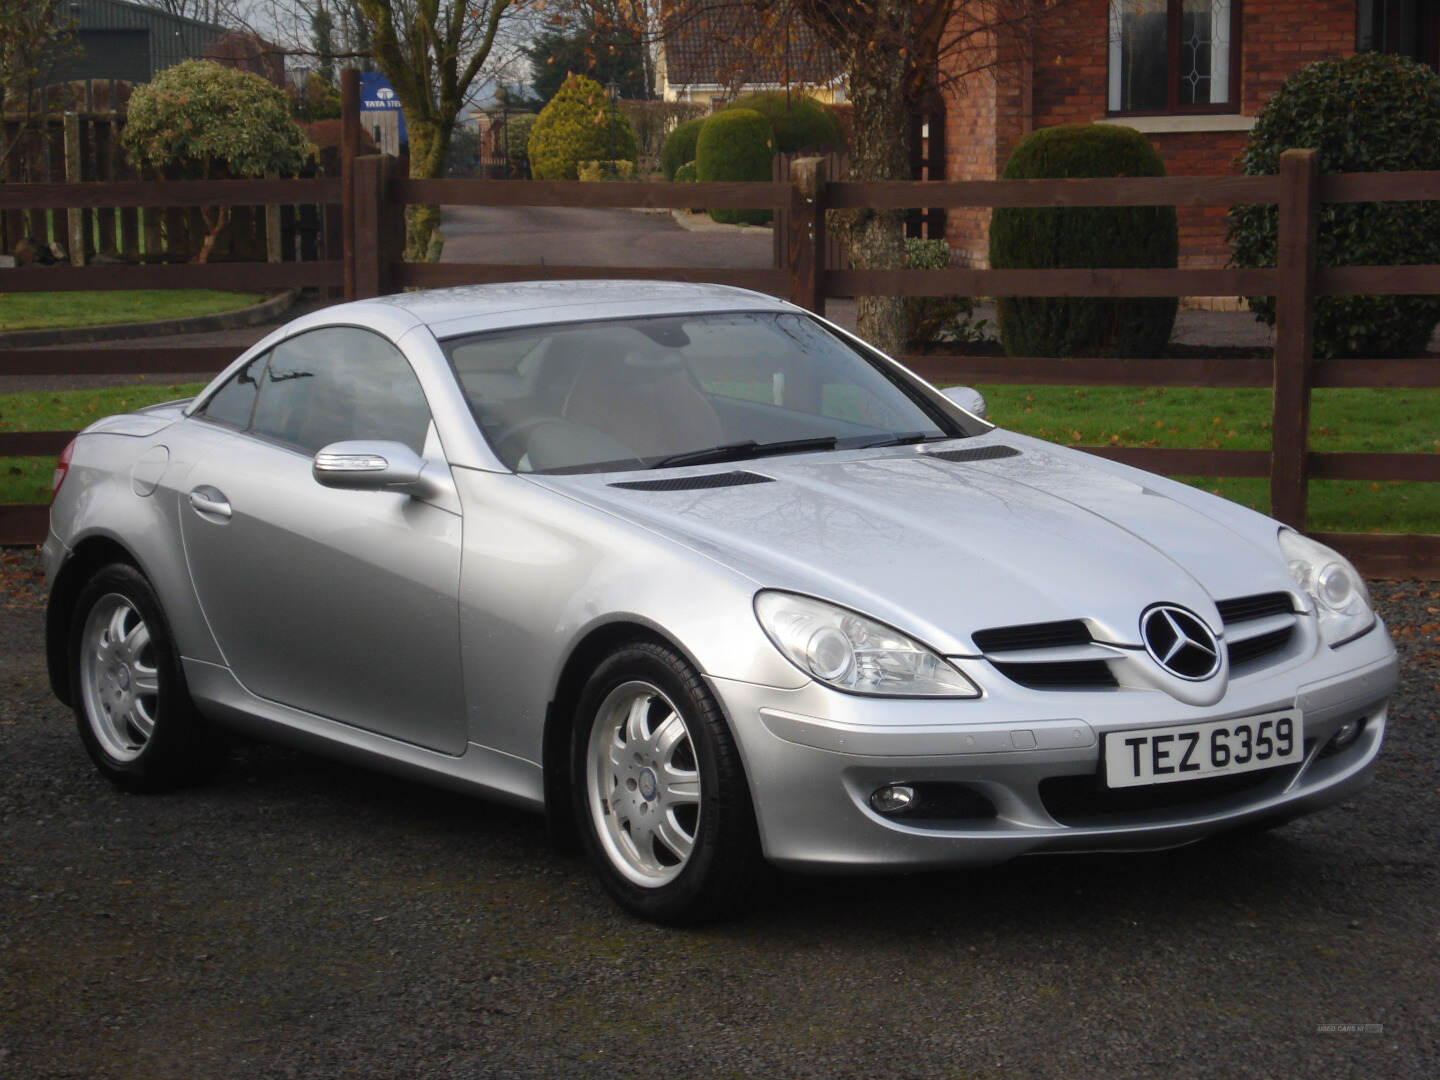 2008 silver Mercedes SLK 200 Kompressor Auto: Vehicular traffic moving  vehicles, convertible, convertibles soft-top, open topped roadster,  cabriolets, drop-tops, cars driving vehicle on UK roads, motors, motoring  on the M61 motorway highway